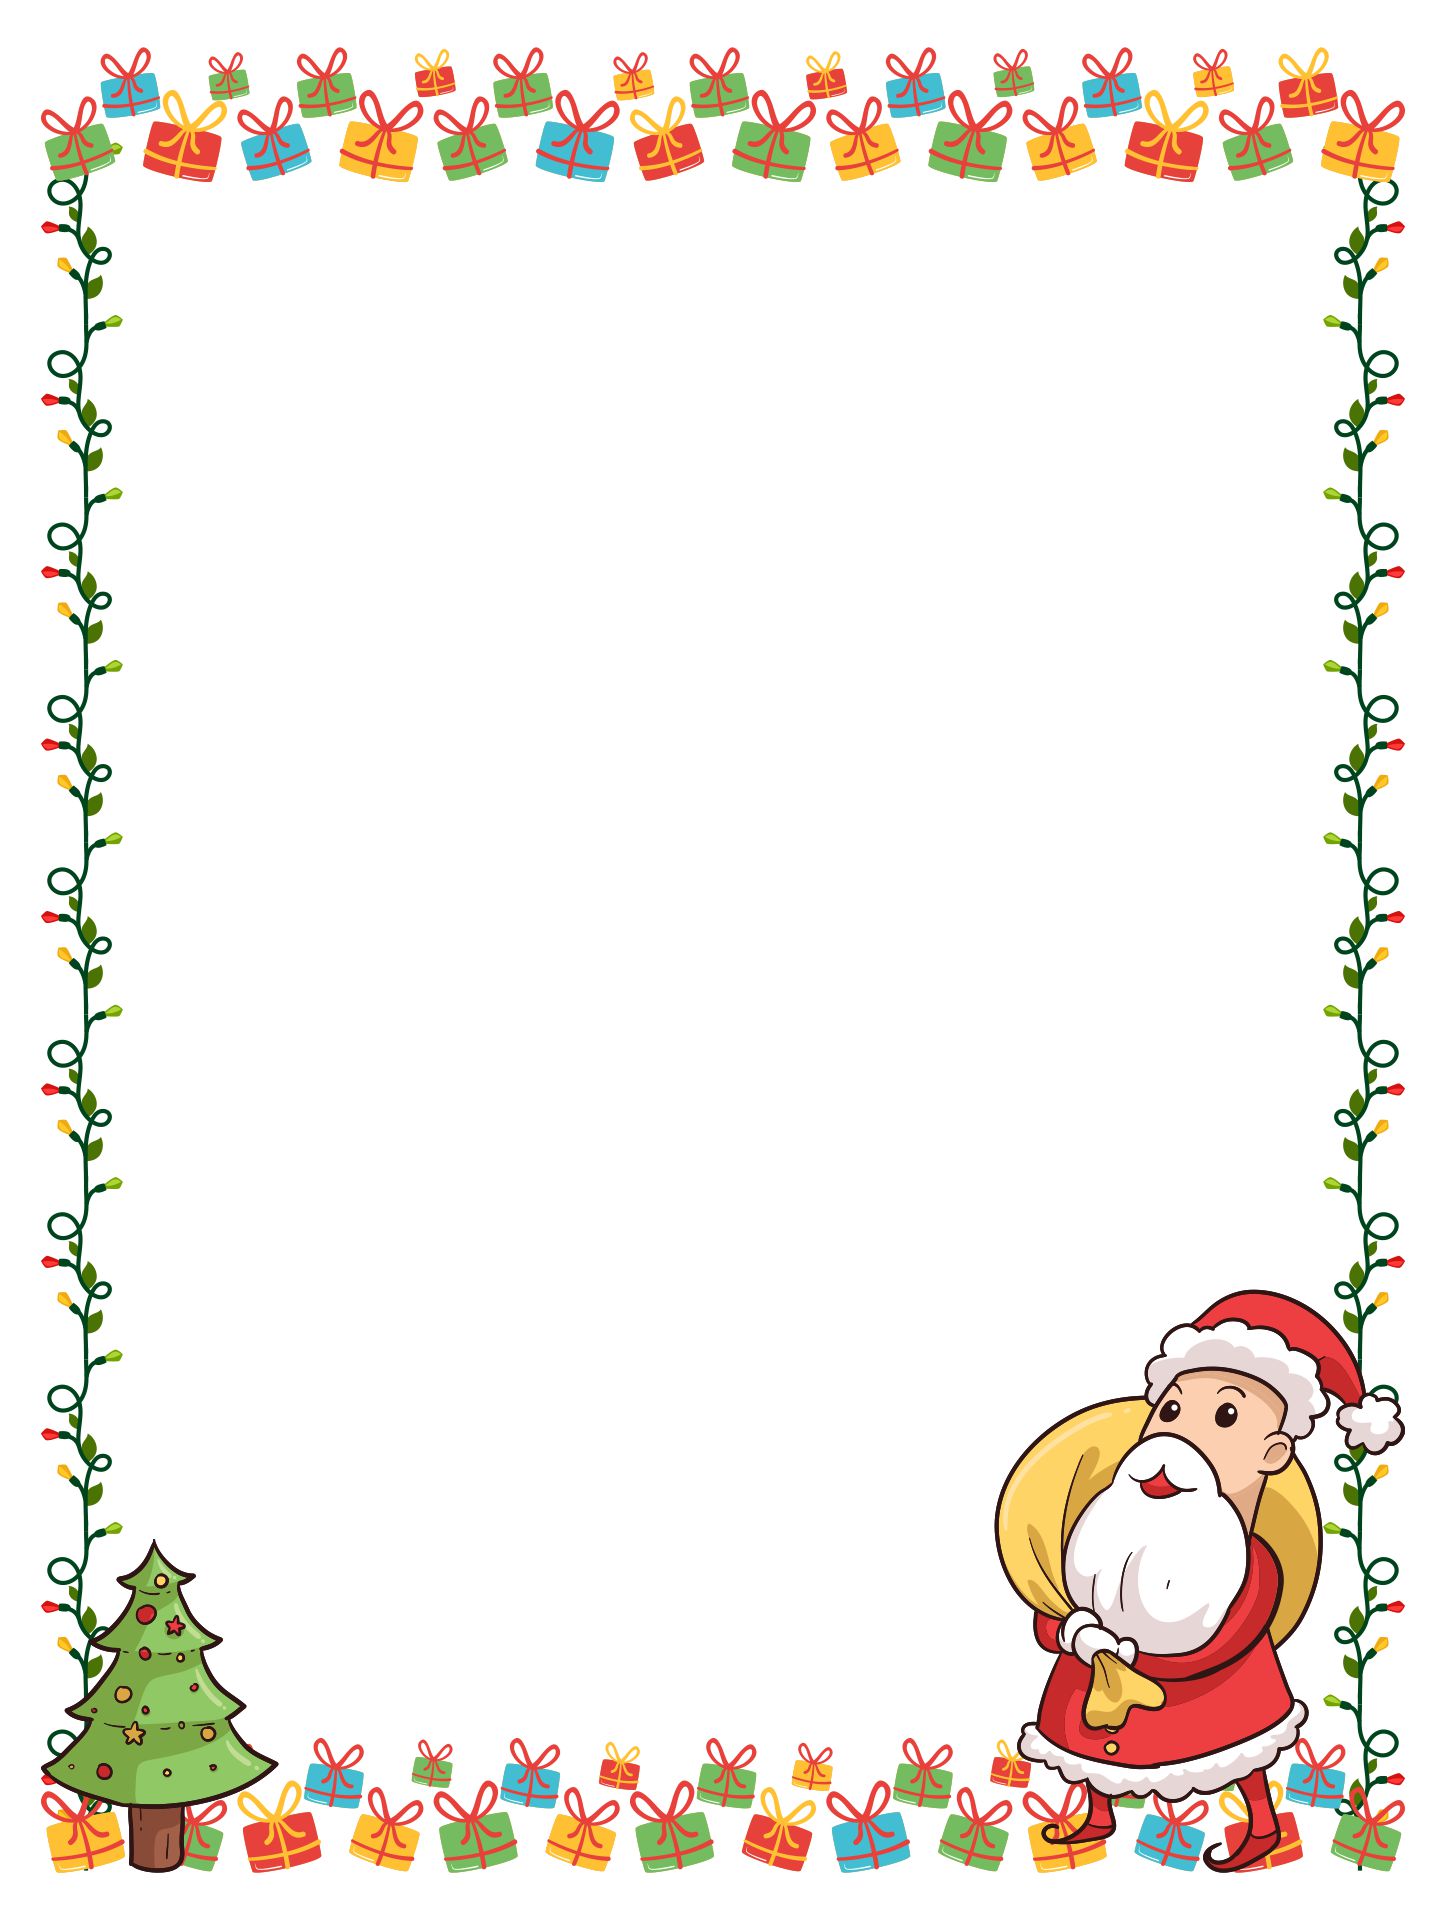 15-best-free-printable-christmas-borders-for-flyers-pdf-for-free-at